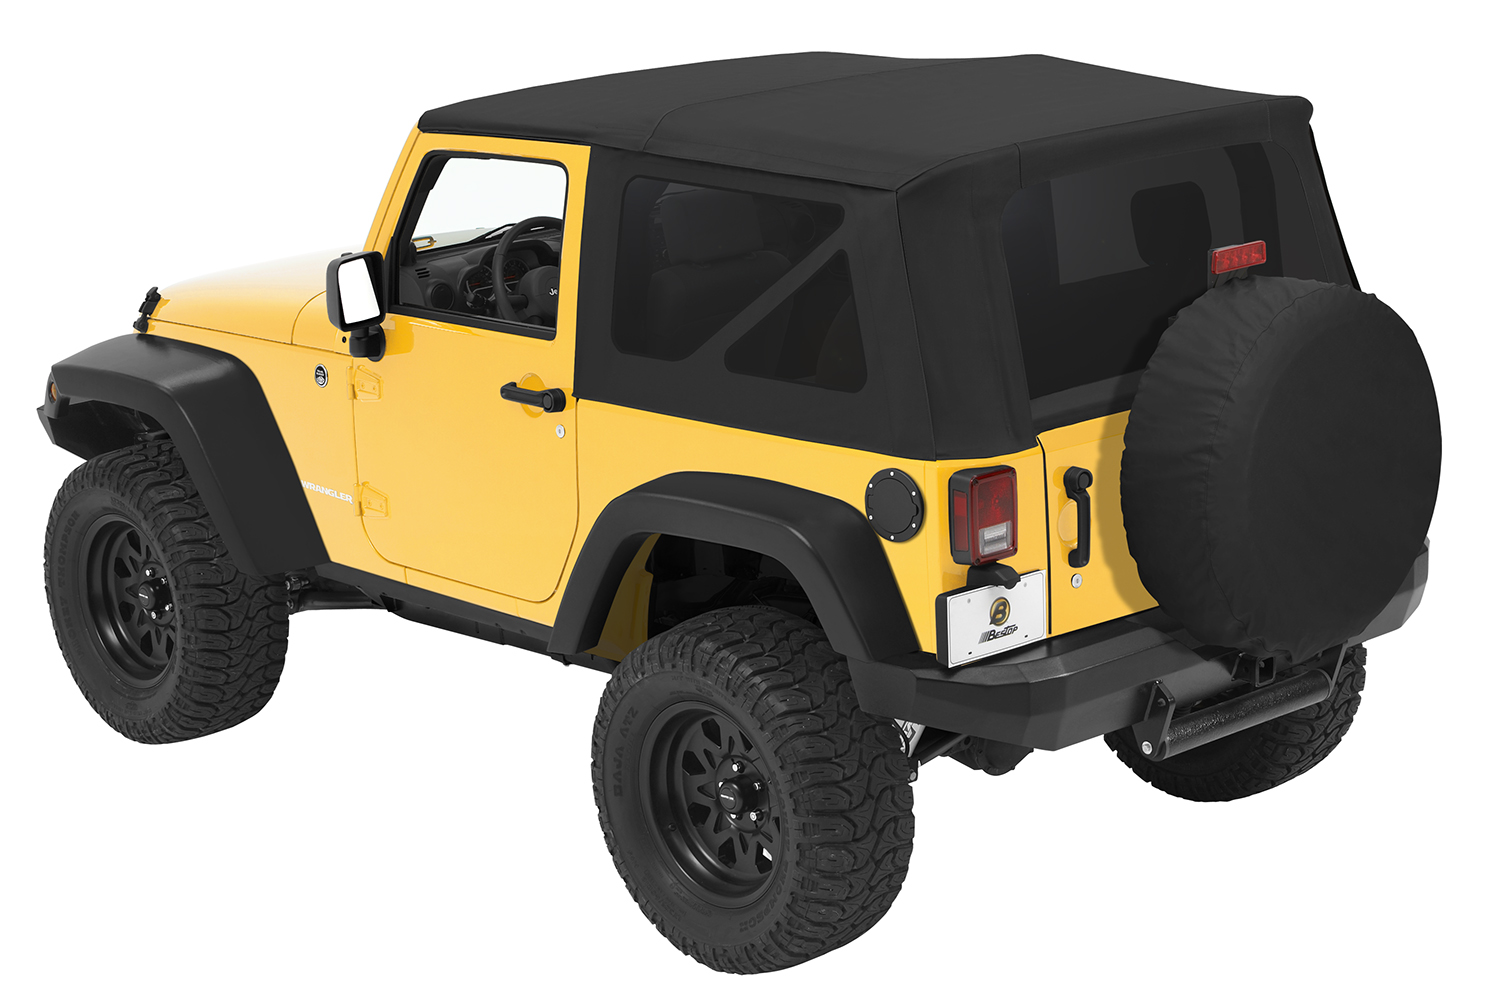 2007-2009 Jeep Wrangler Unlimited Pavement Ends by Bestop 51201-35 Black Diamond Replay Replacement Soft Top Tinted Windows-No door skins included-No frame hardware included 